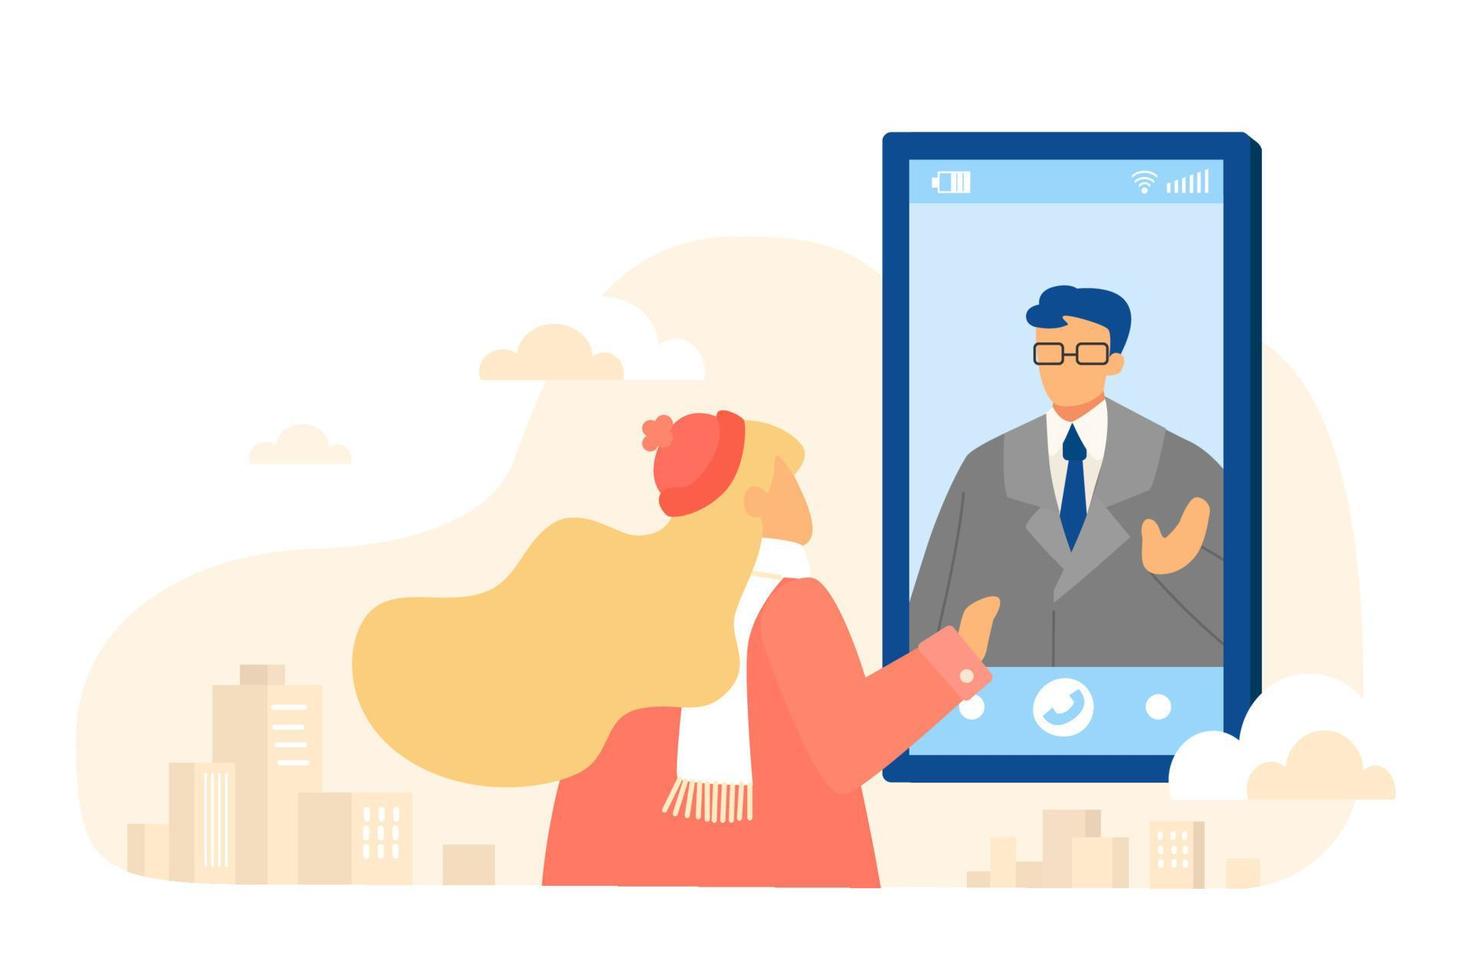 Flat style illustration, woman doing online distant call while her husband on his business trip. City buildings background. vector